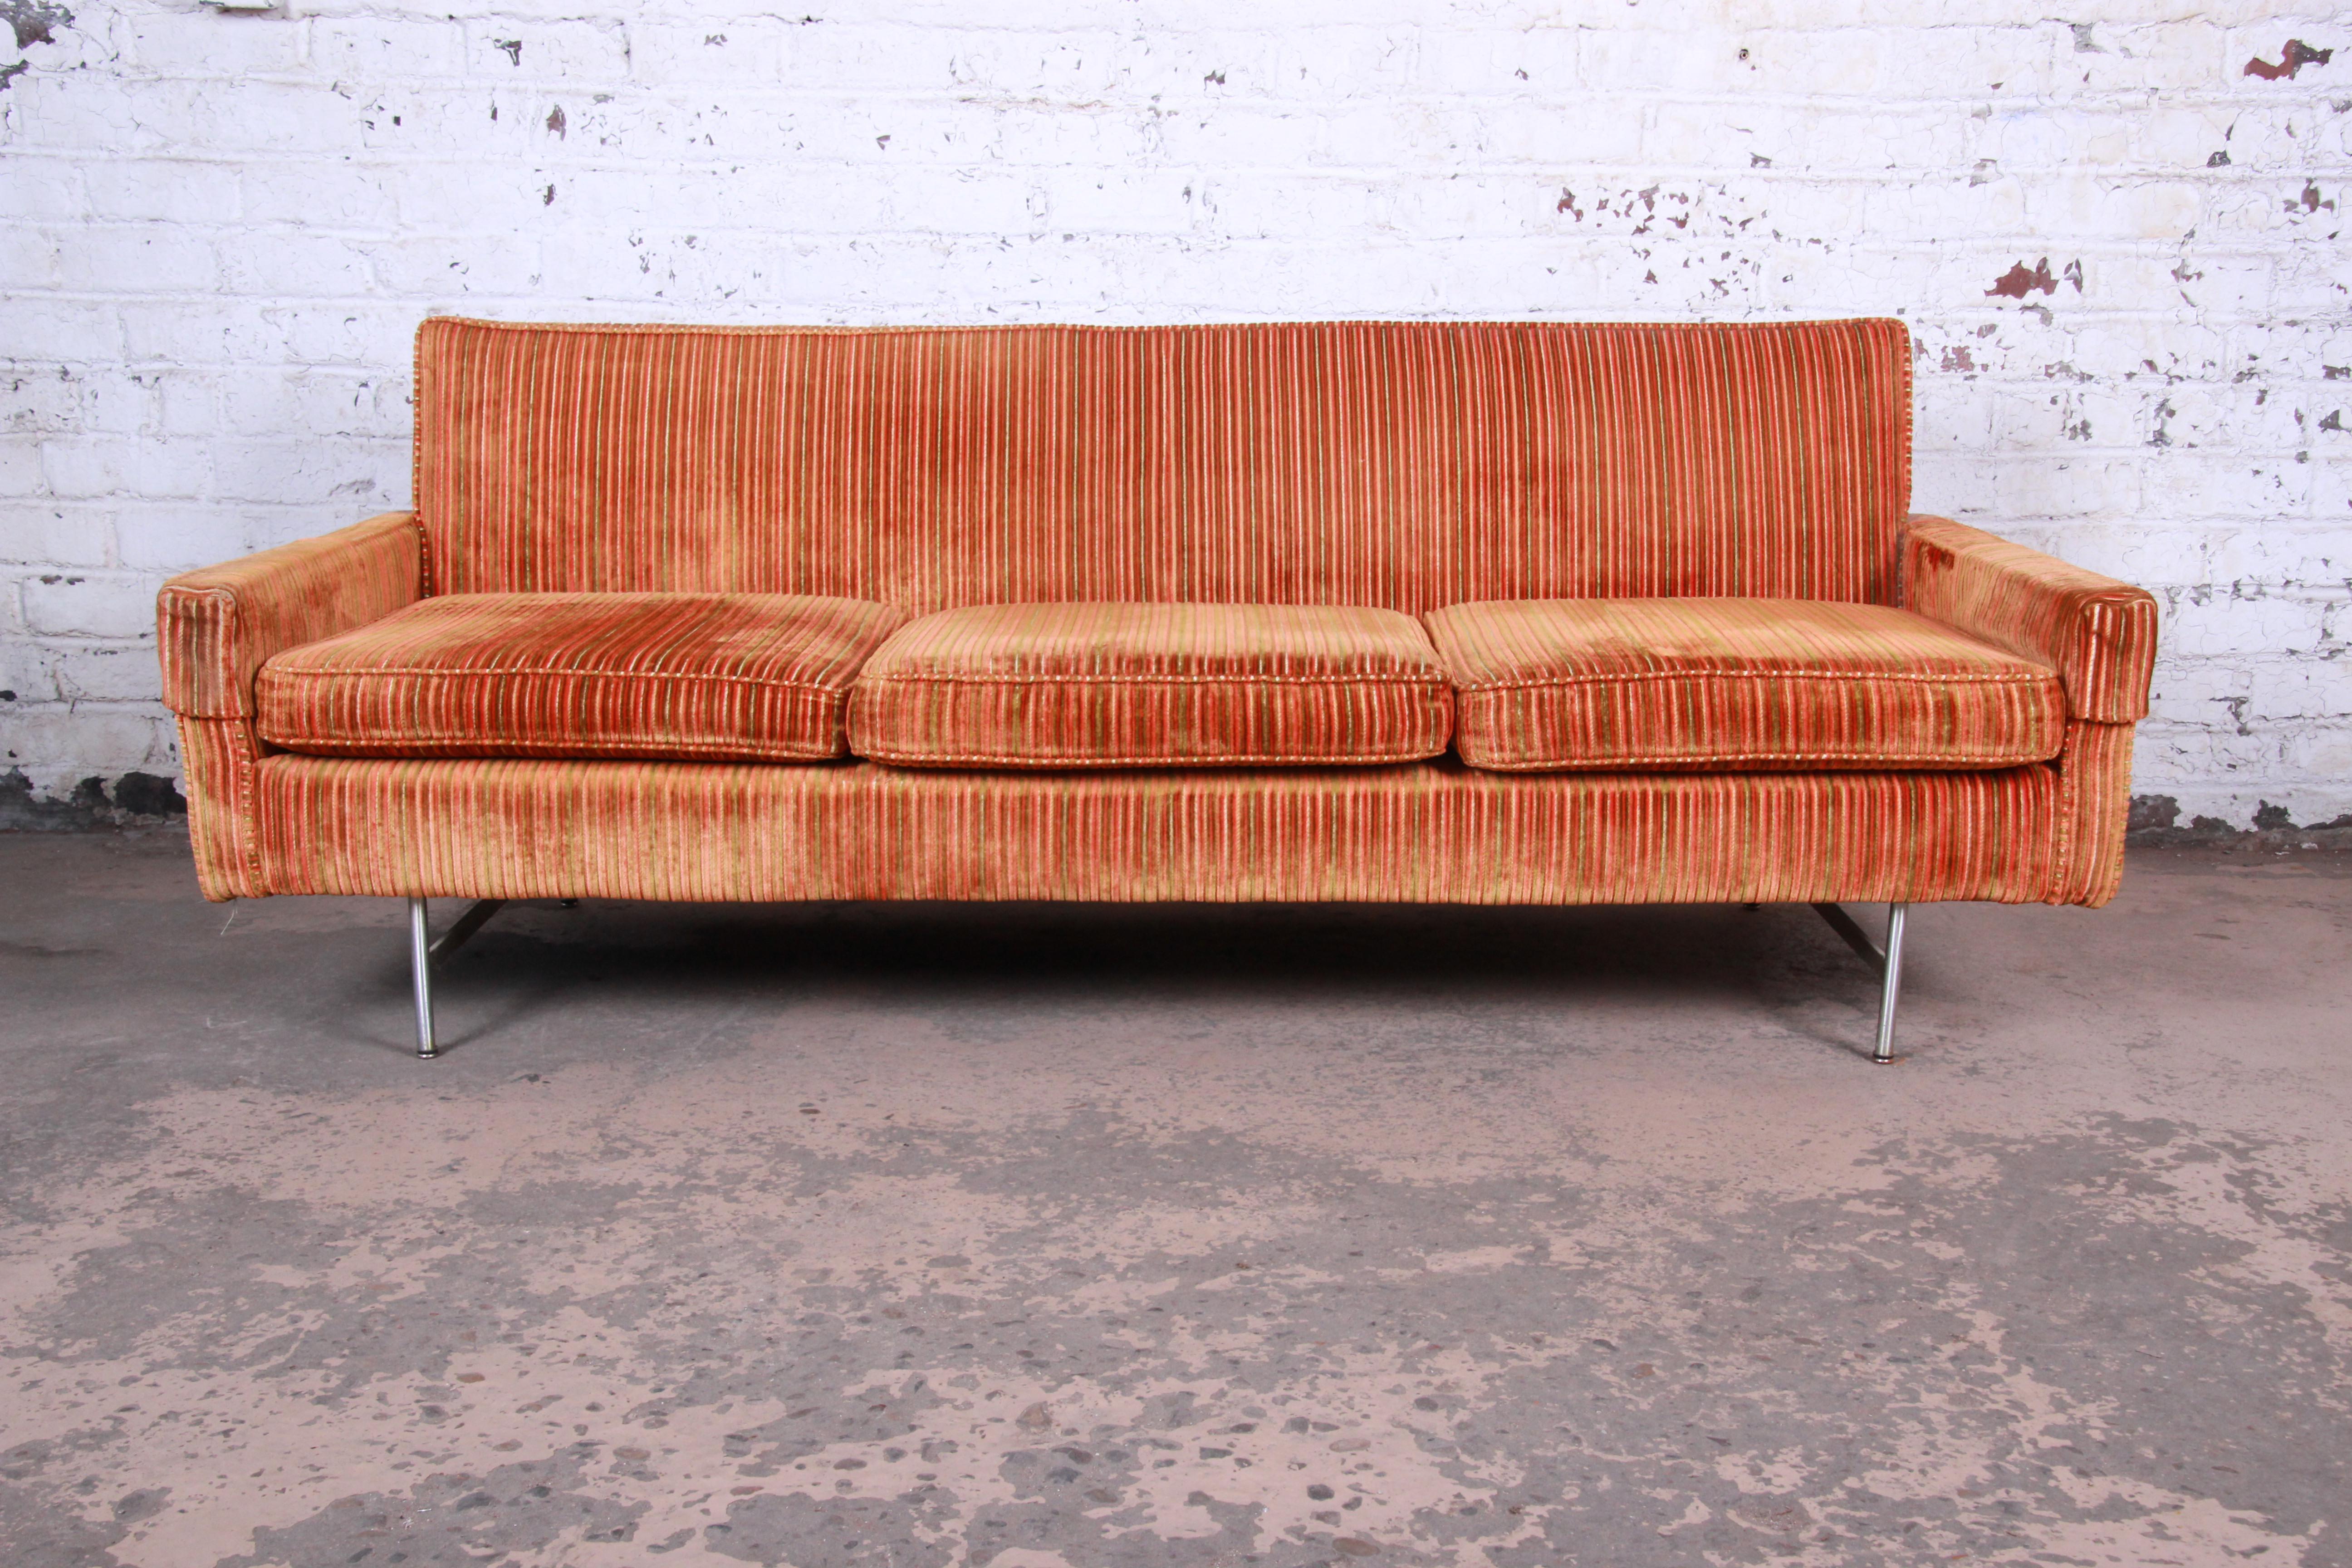 A rare and exceptional Mid-Century Modern sofa from the Linear Group line by Paul McCobb for Calvin Furniture. The sofa features McCobb's sleek, Minimalist midcentury design and beautiful original striped upholstery in orange and green. It rests on